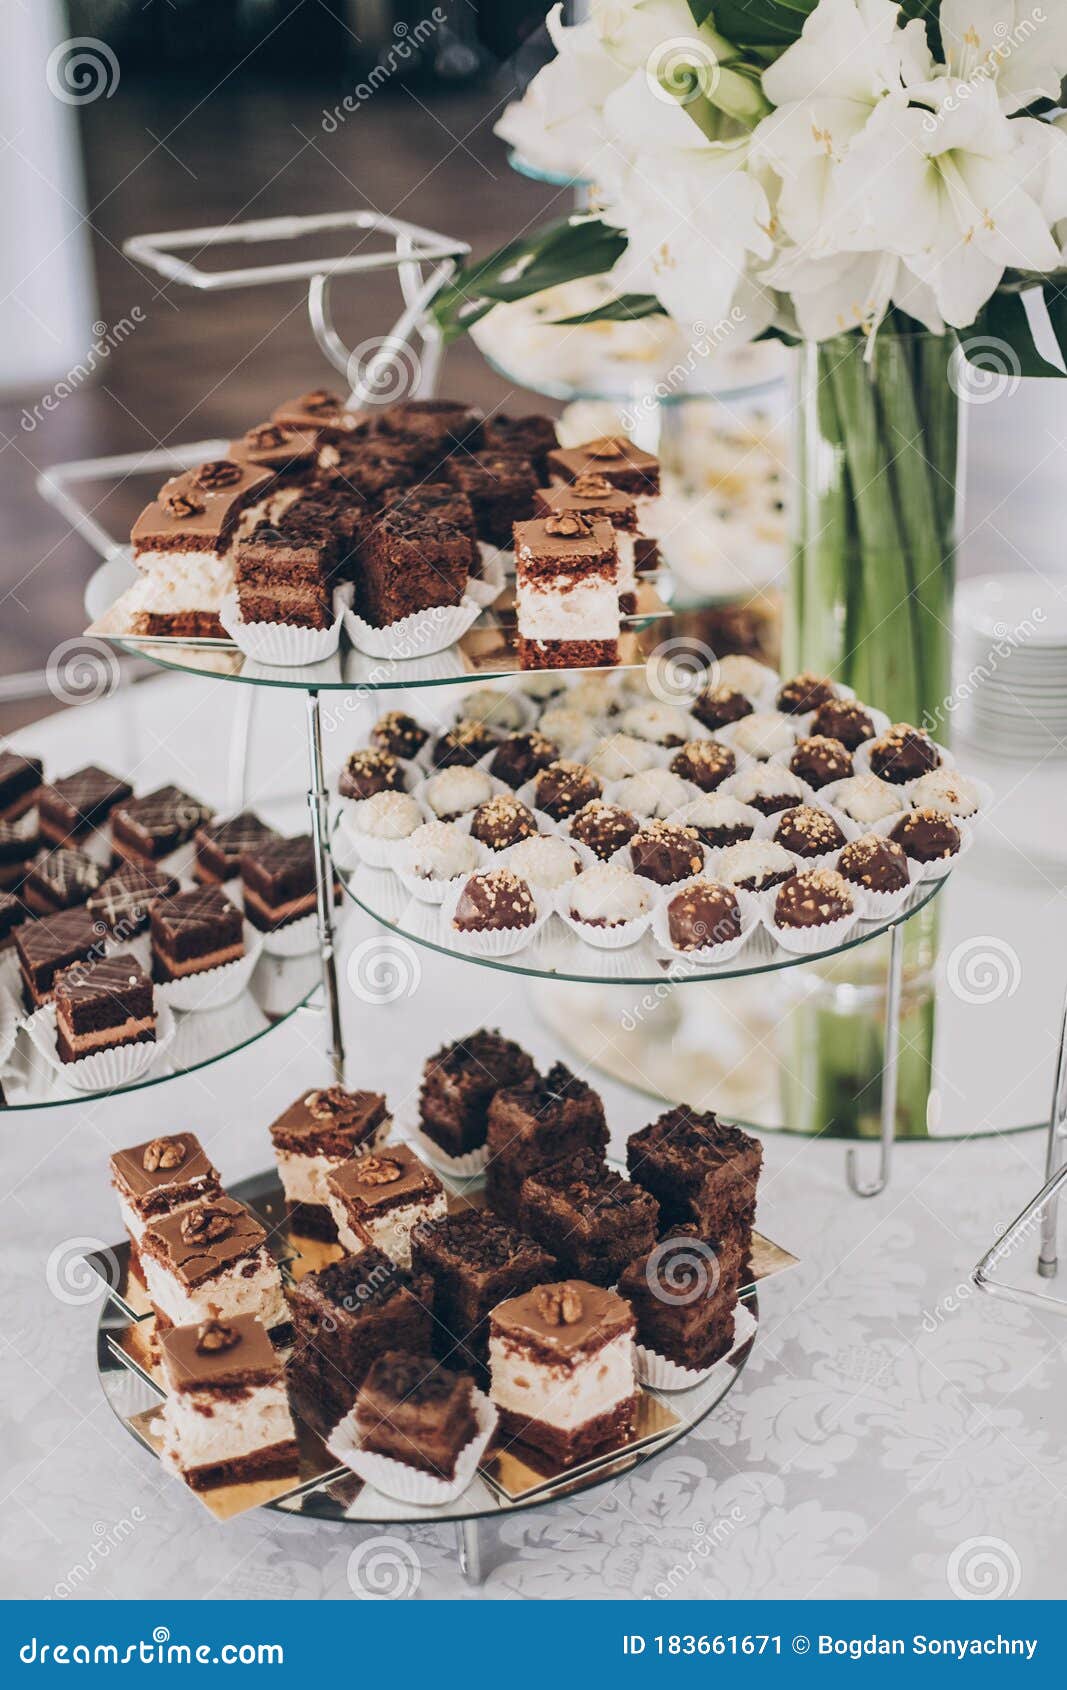 Wedding Candy Bar. Delicious Chocolate Desserts, Cakes and Cookies on Stand  at Wedding Reception in Restaurant Stock Image - Image of celebration,  stylish: 183661671